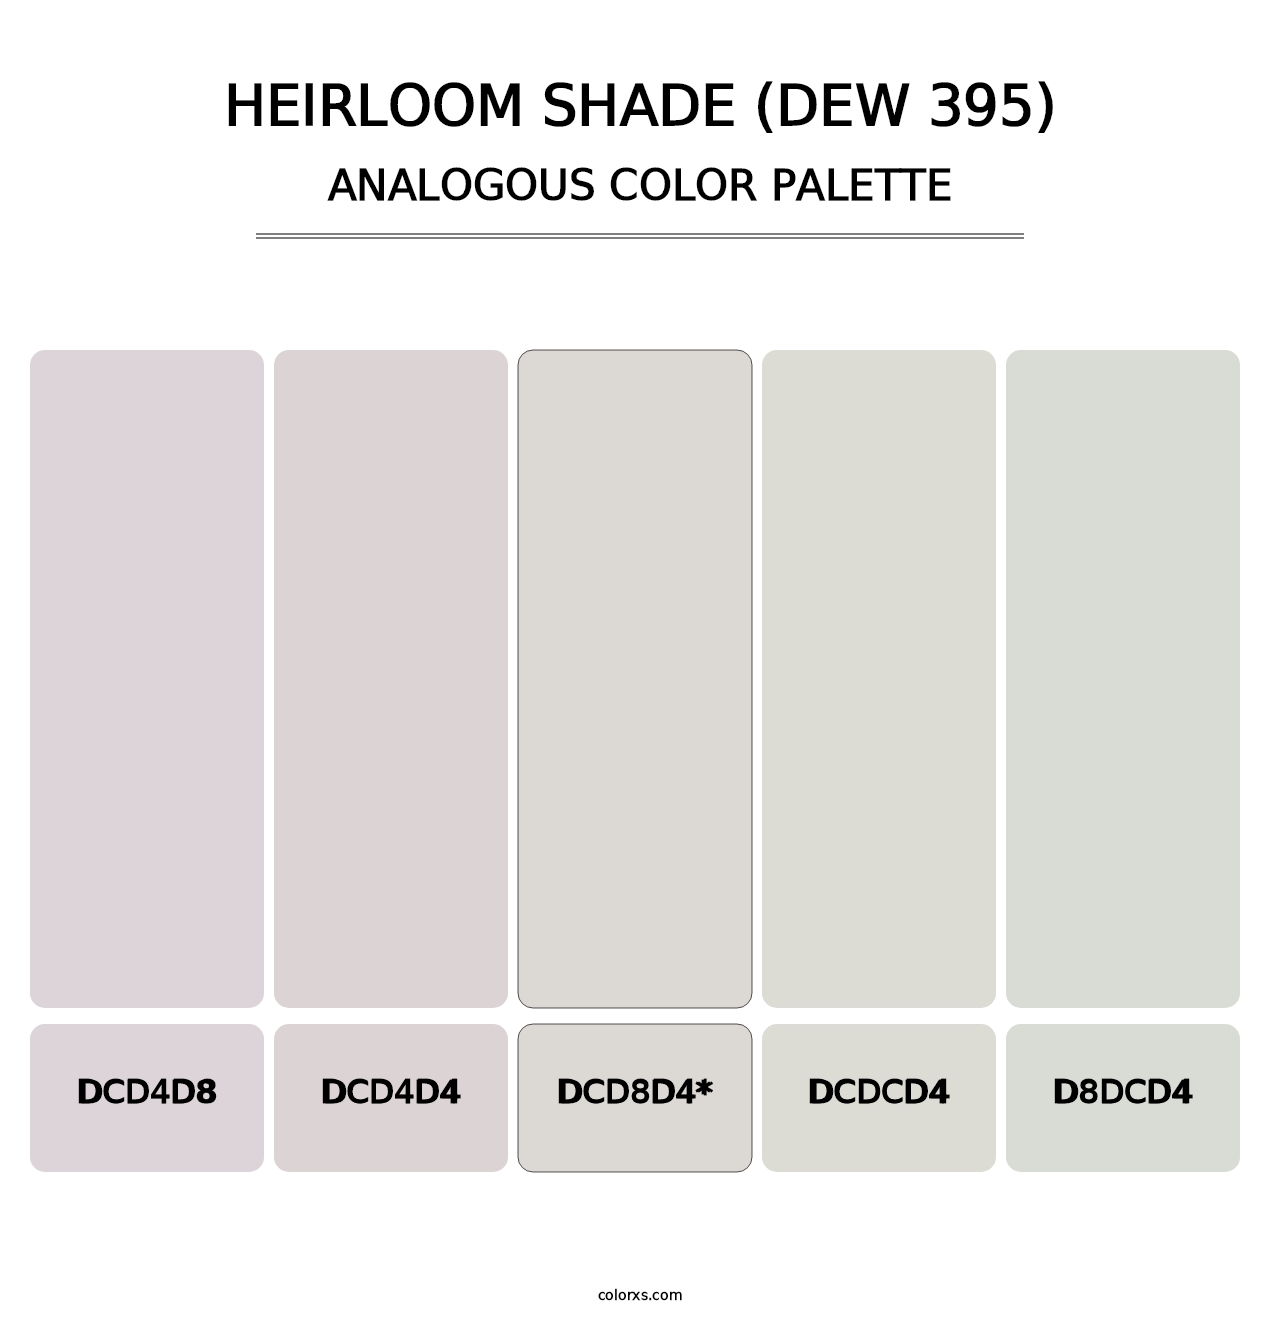 Heirloom Shade (DEW 395) - Analogous Color Palette